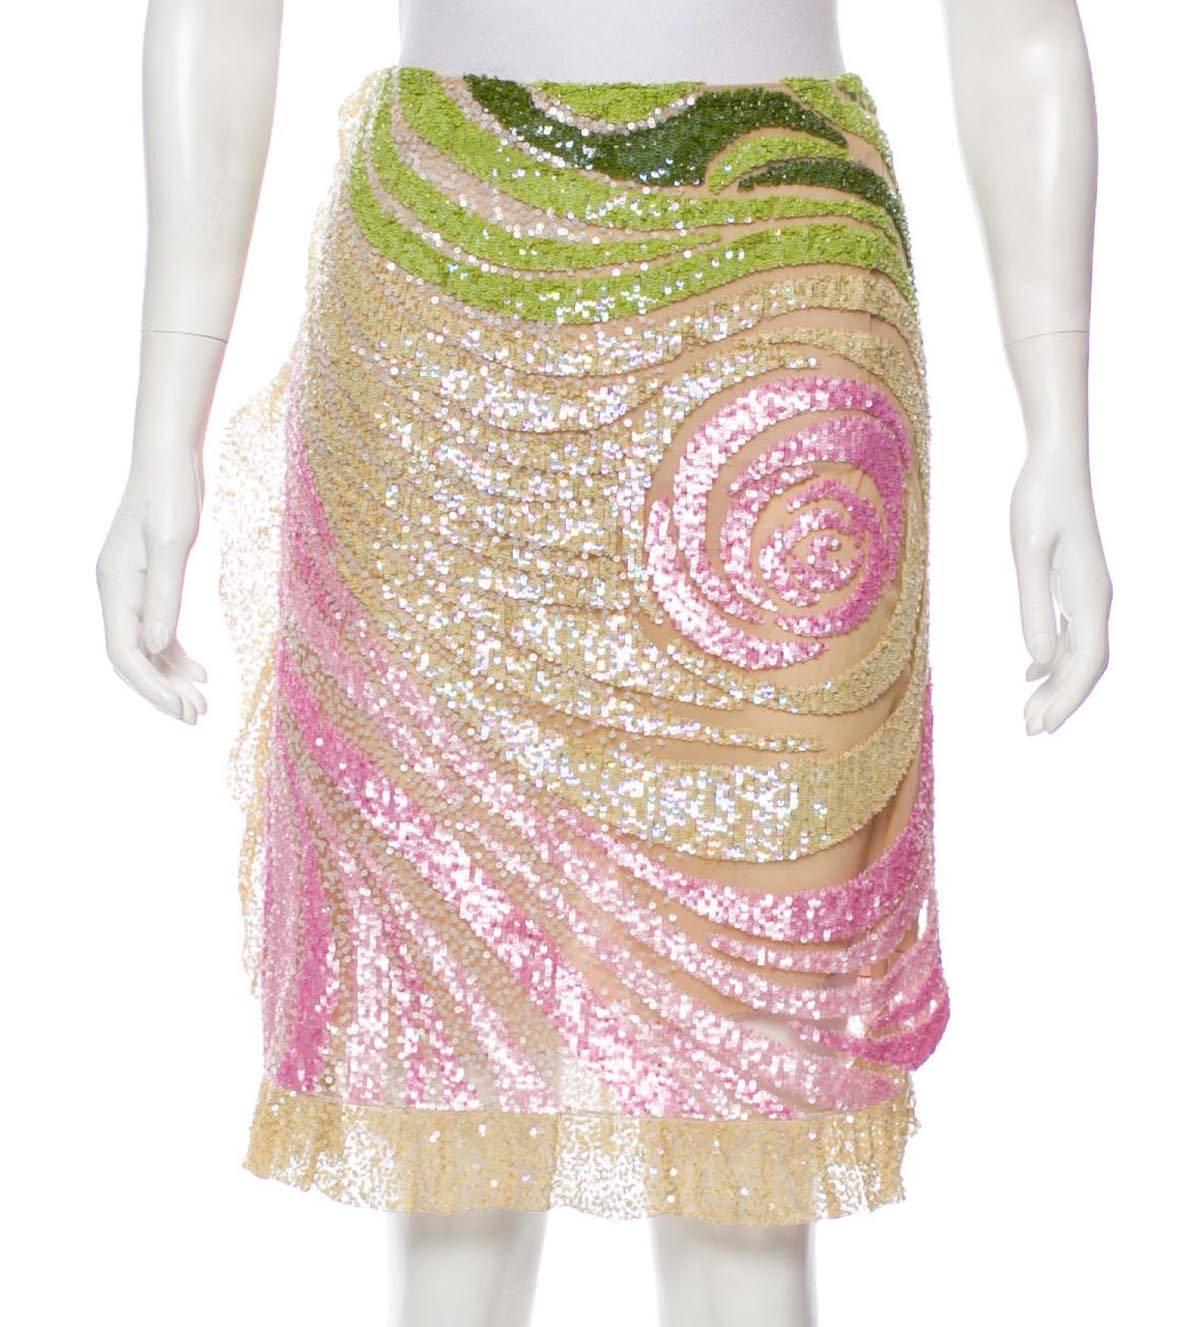 Valentino Sequin Embellished Knee Length Tulle Skirt 
Designer size 6
Soft Pink and Green Sequins Embellishment Over the Tulle, Fully Lined, Ruffle Accent on Side and Hem, Side Vent.
Measurements: Length - 23 inches. Waist - 30.
Made in